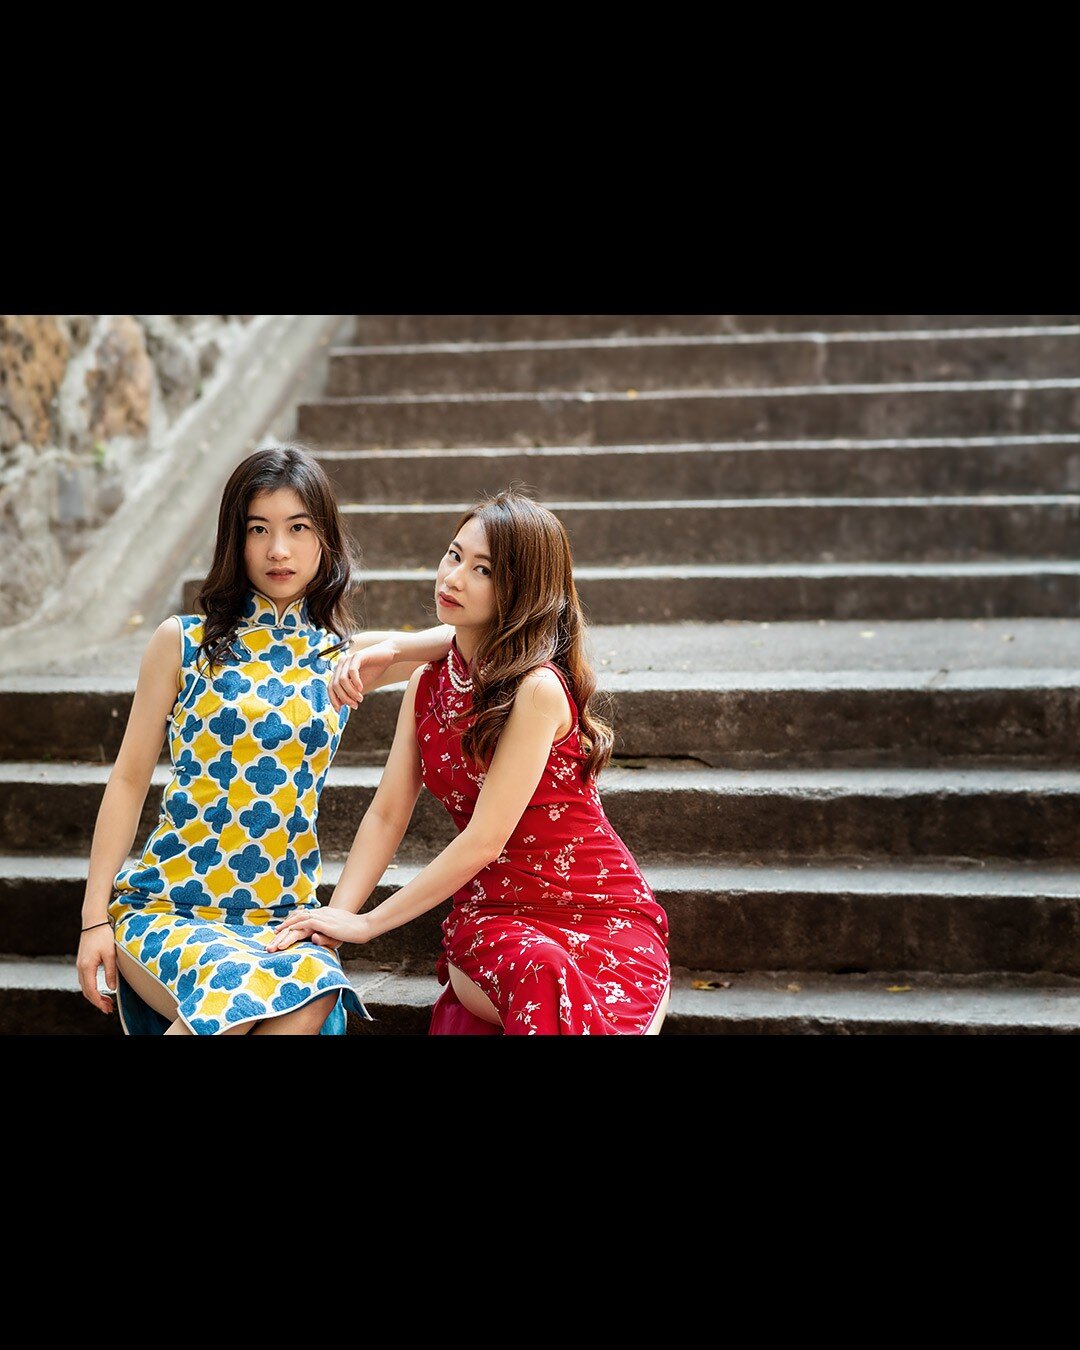 \\ QI PAO SERIES
&quot;The qipao is also easy to be &ldquo;borrowed&rdquo;, be it on the silver screen or in the Western fashion world. Originally, it was created for women who wanted to express their desires and free will. While cinema uses the qipa